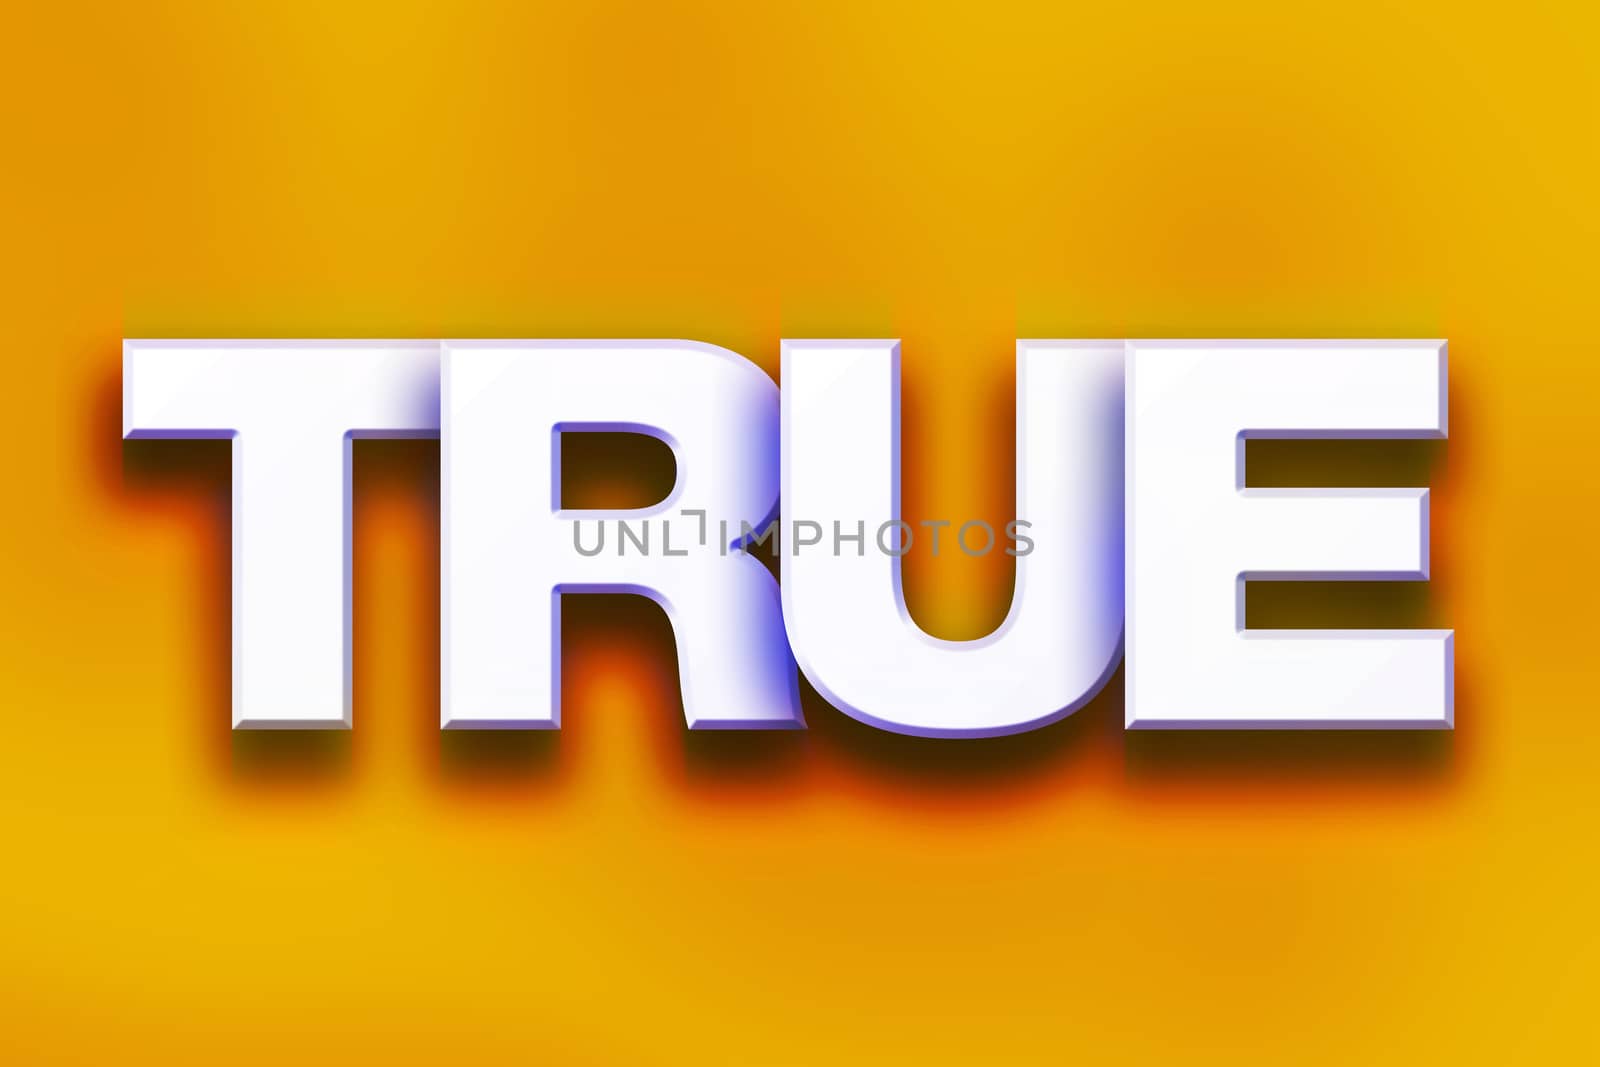 The word "True" written in white 3D letters on a colorful background concept and theme.